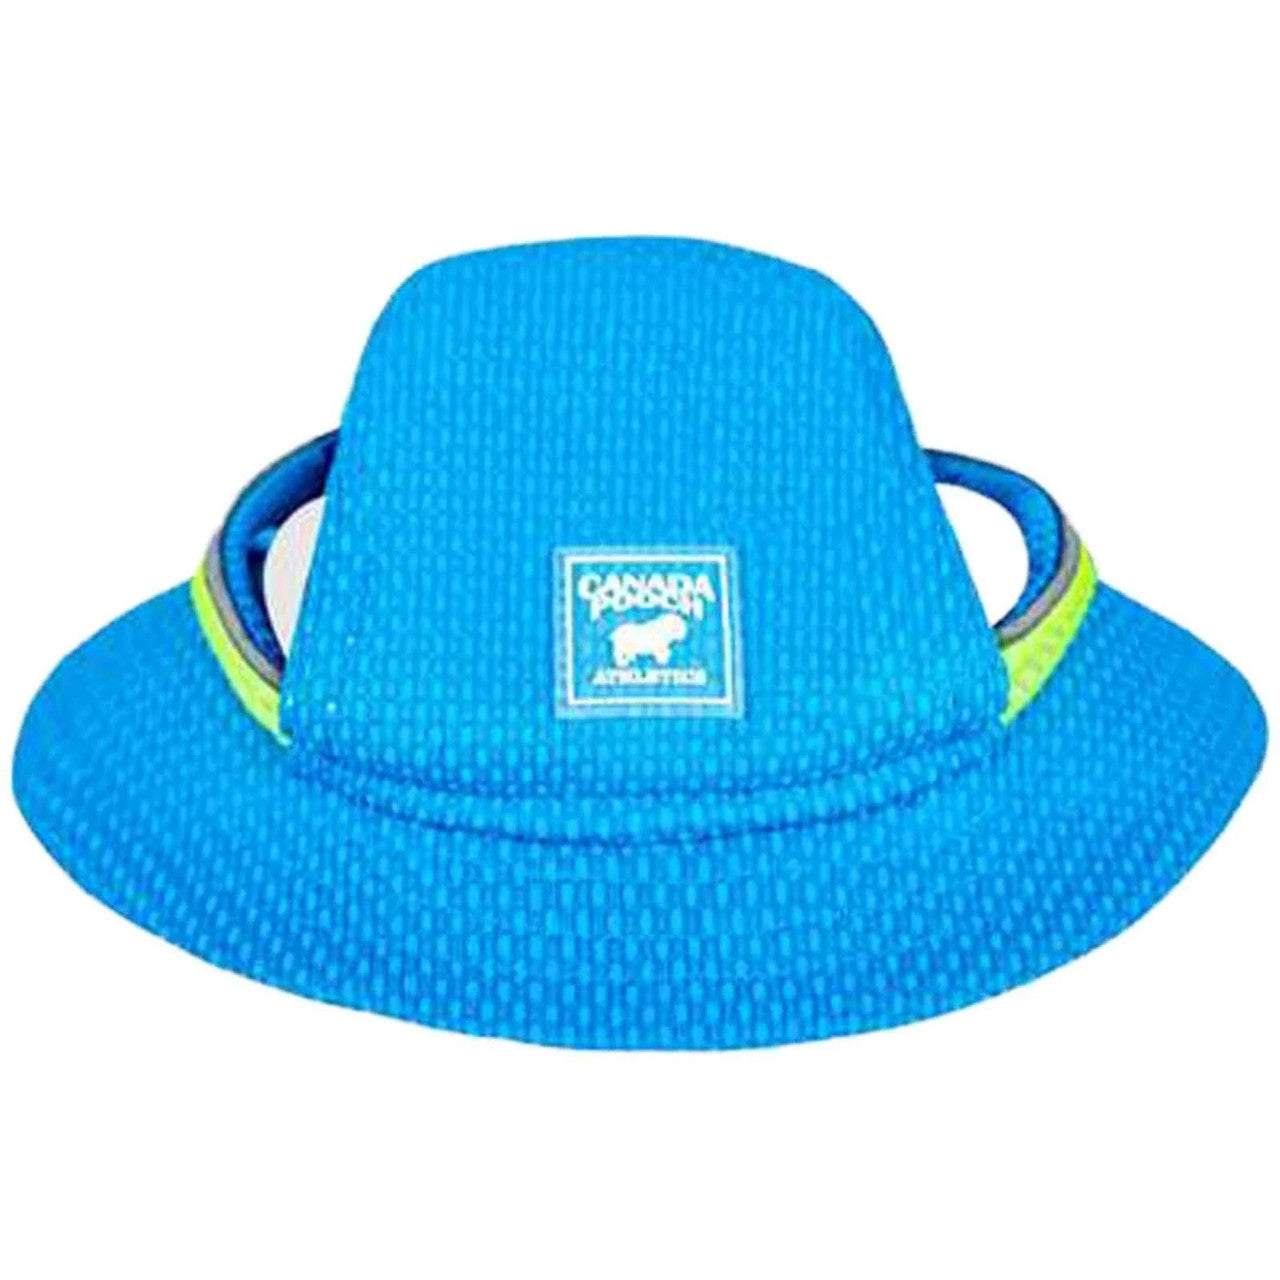 Canada Pooch Dog Cooling Bucket Hat Blue Small 628284103912